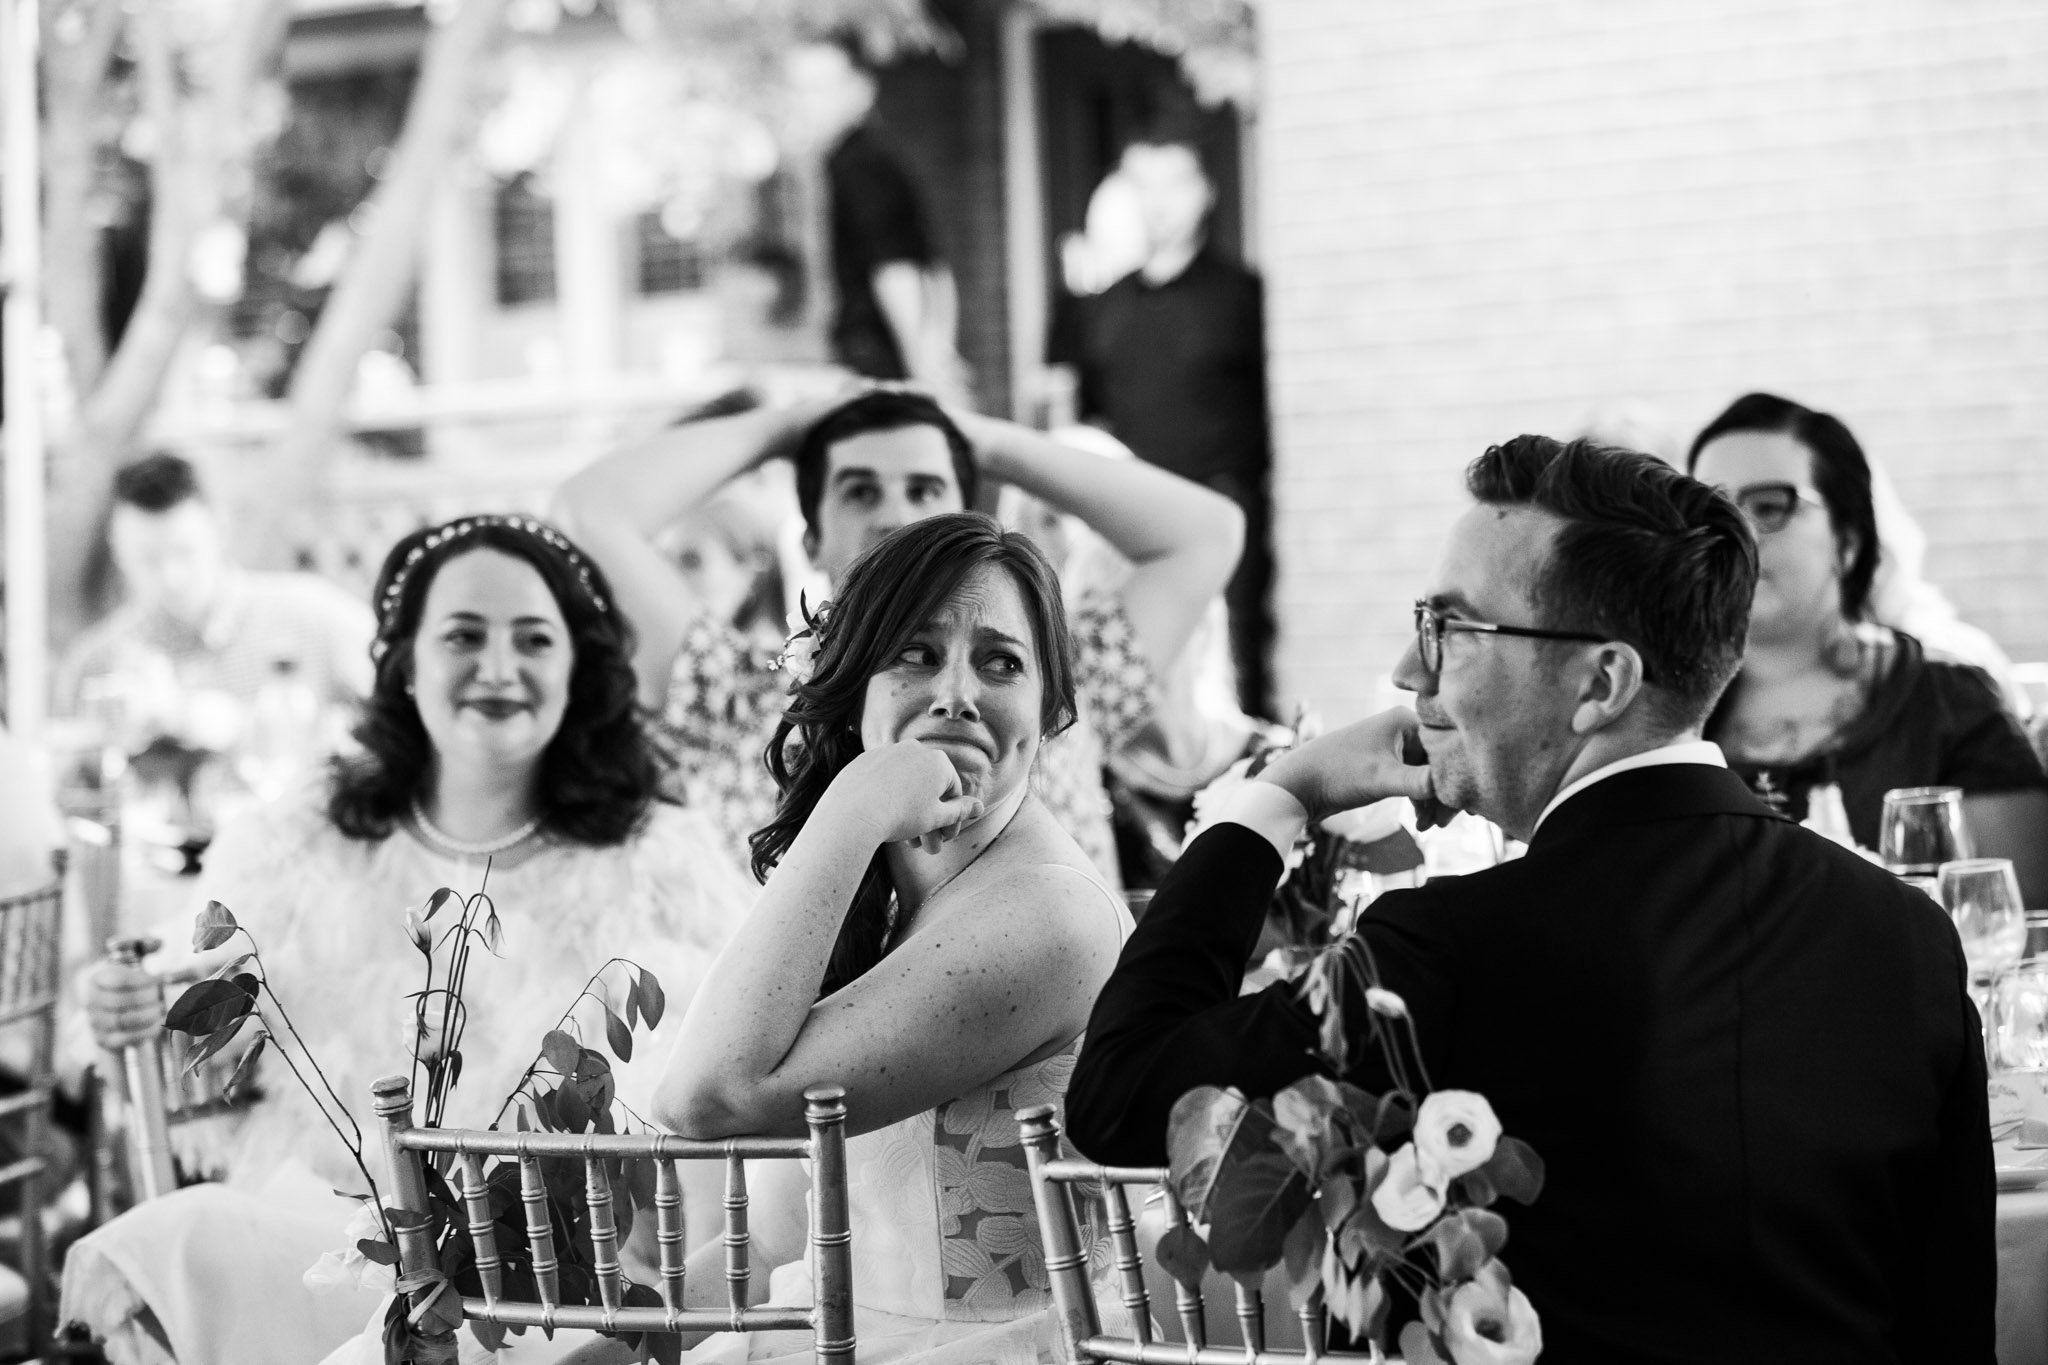 bride looking emotional at groom during speeches- black and white wedding photography.jpg